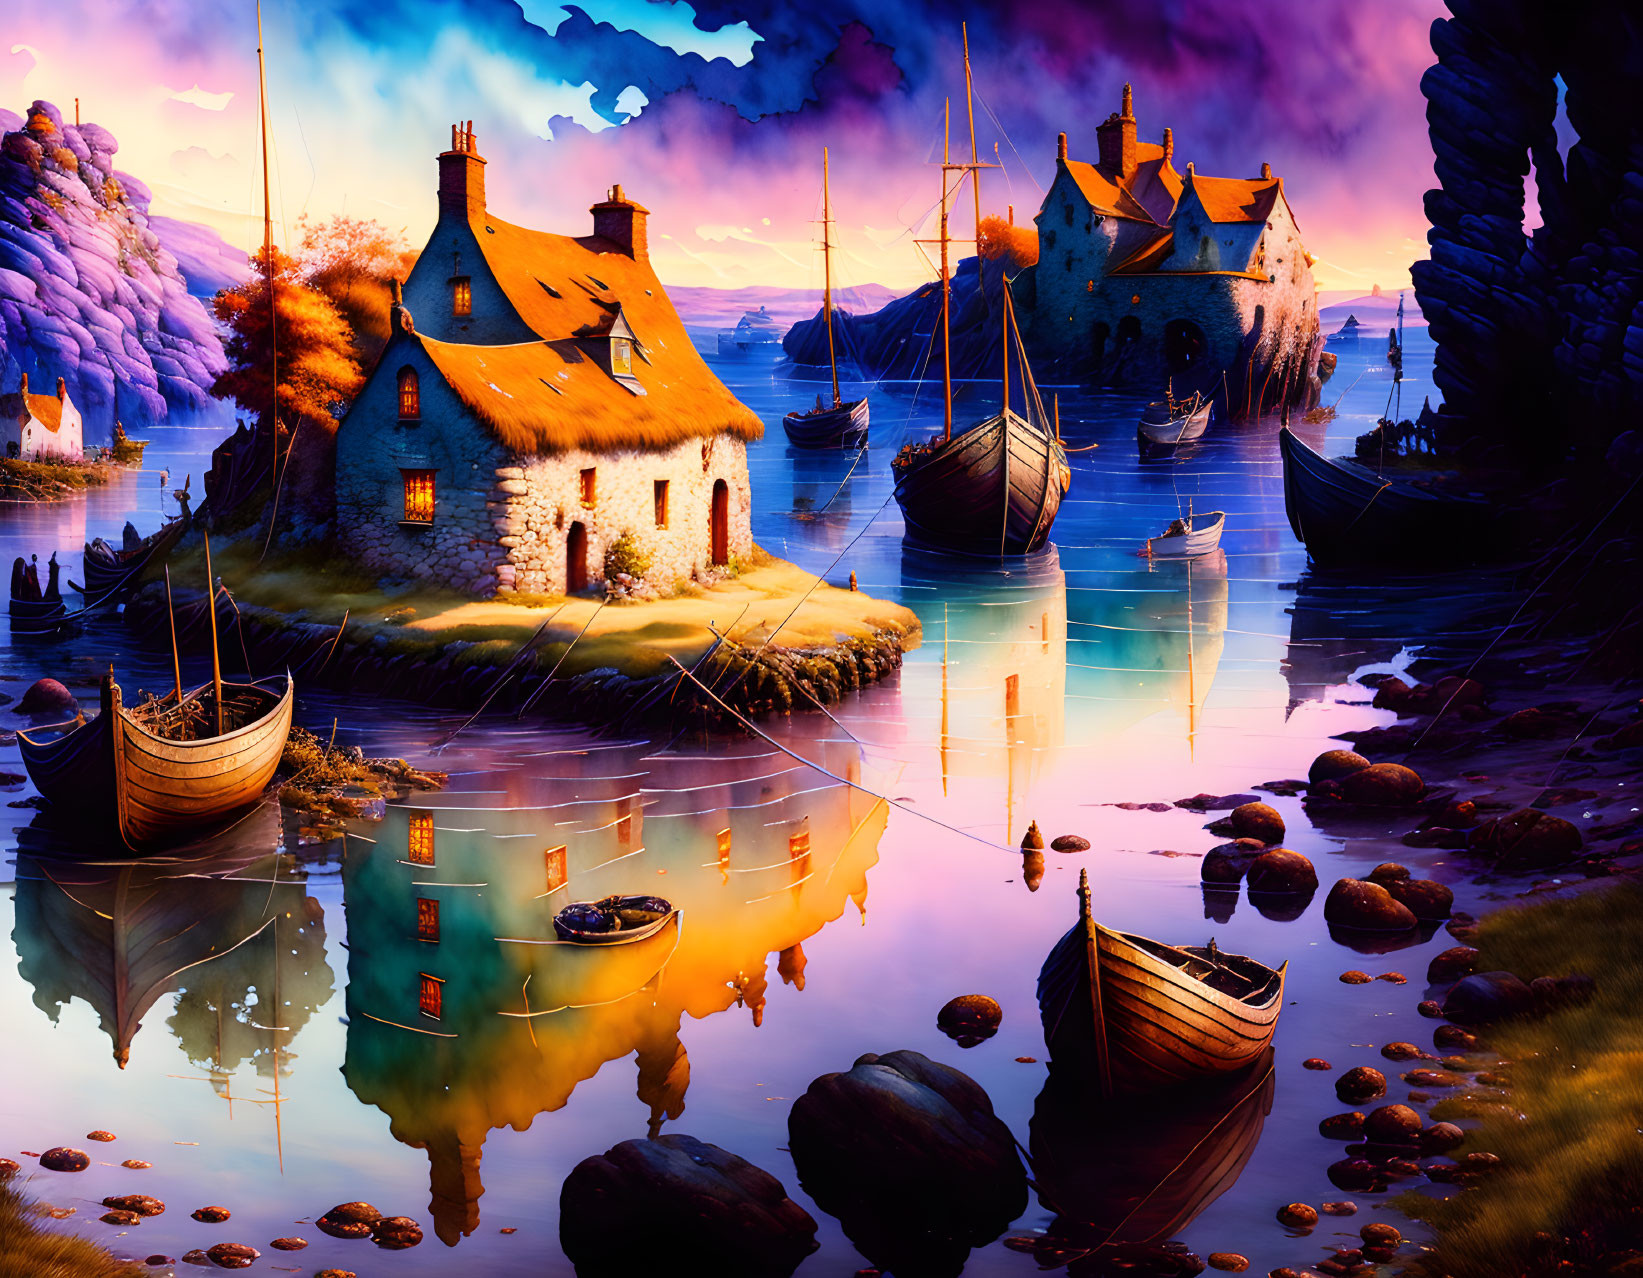 Vibrant fantasy landscape: sunset, thatched cottage, stone castle, calm waters, wooden boats